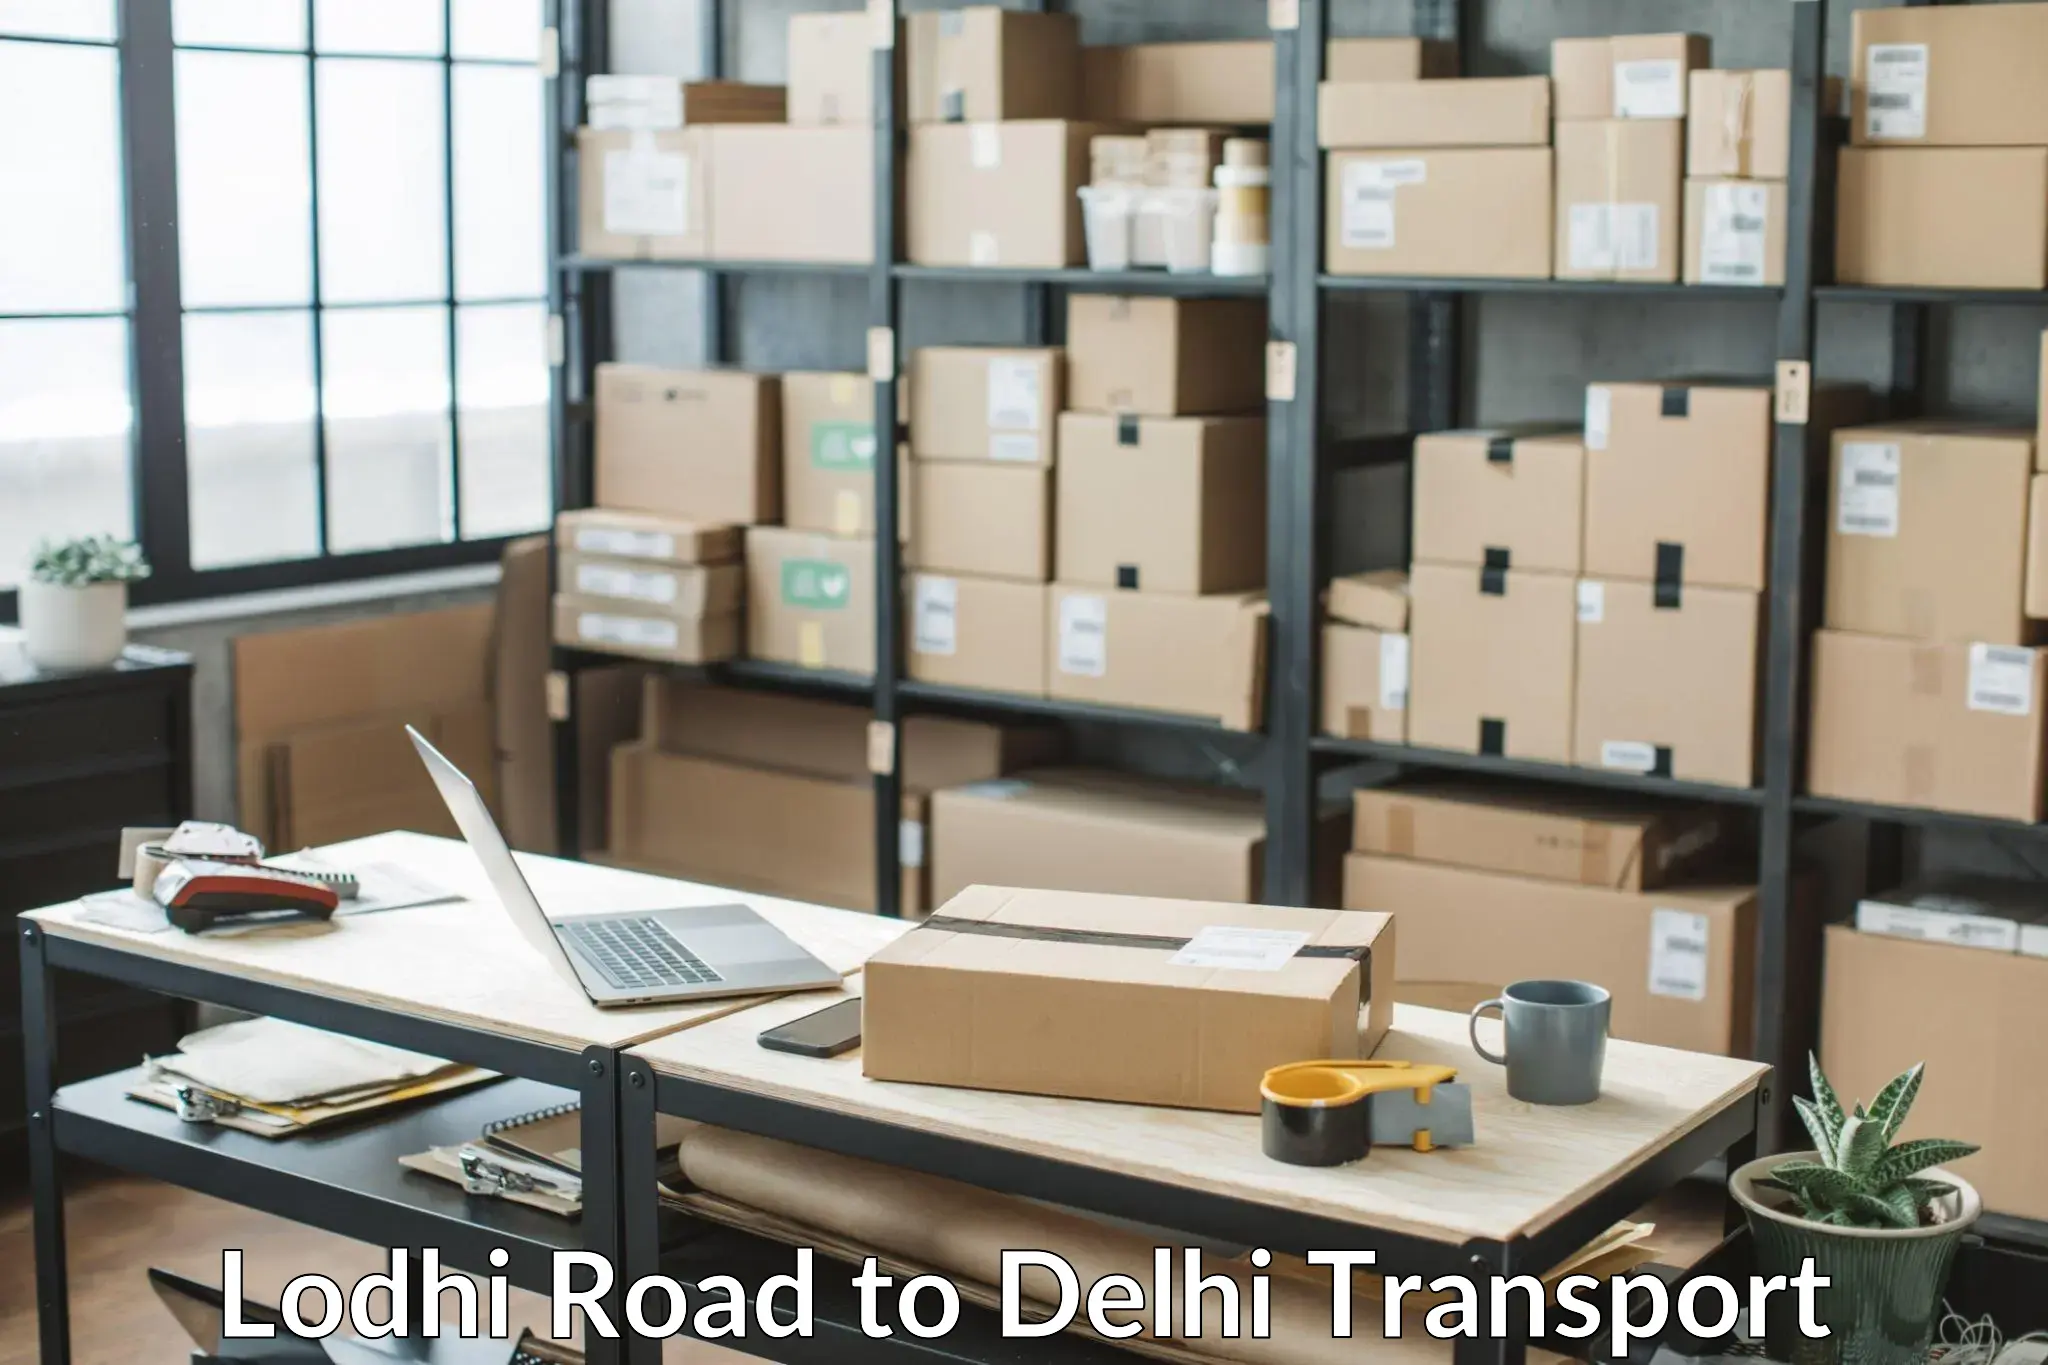 Container transport service Lodhi Road to Delhi